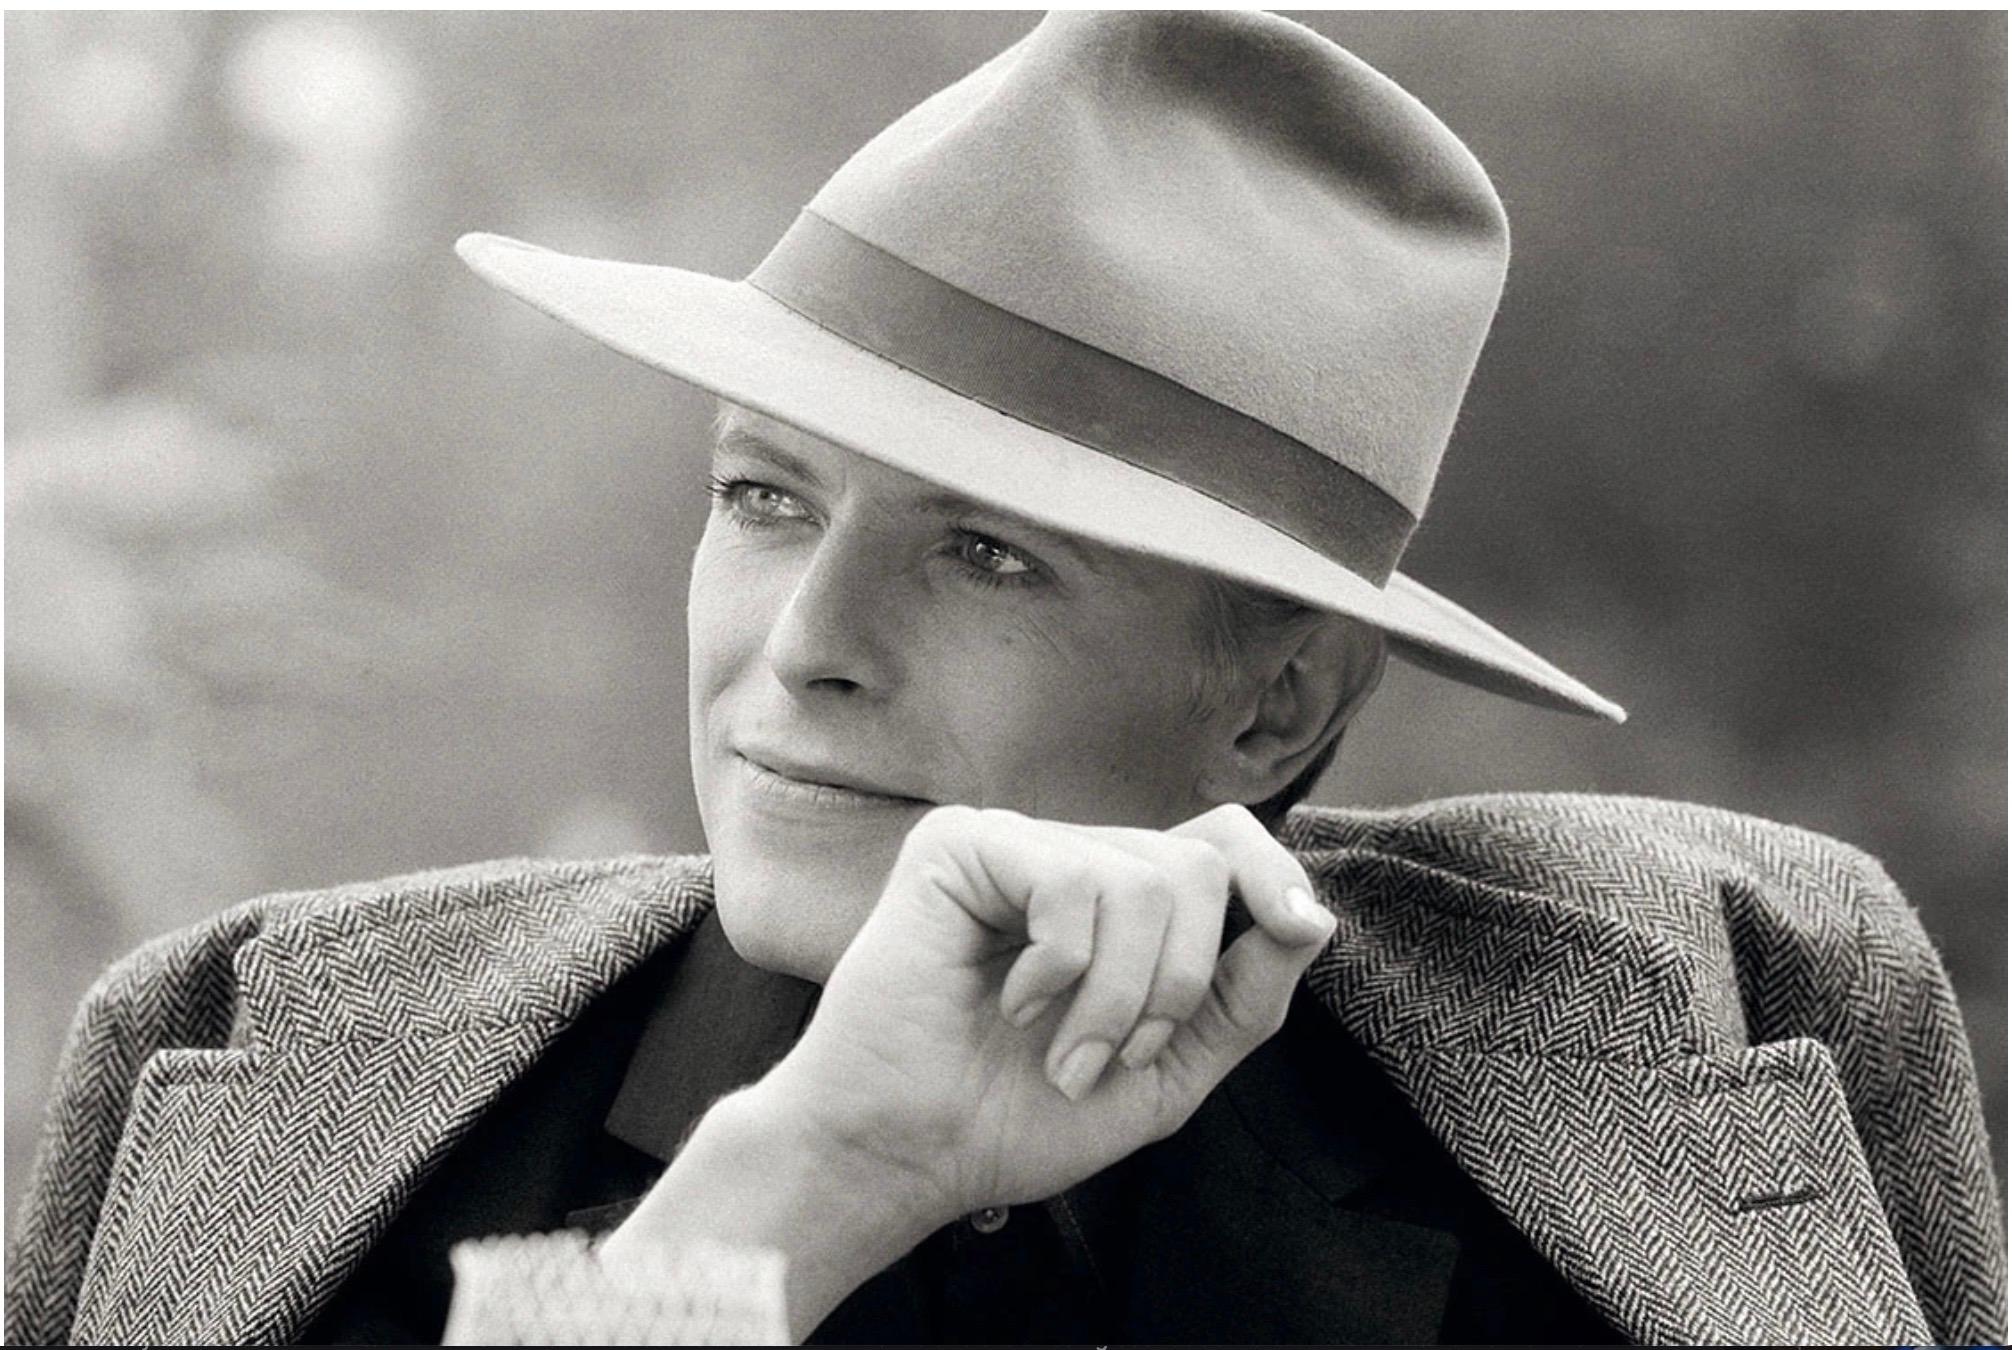 Terry O'Neill Portrait Photograph - David Bowie during the filming of 'The Man Who Fell to Earth' Los Angeles 